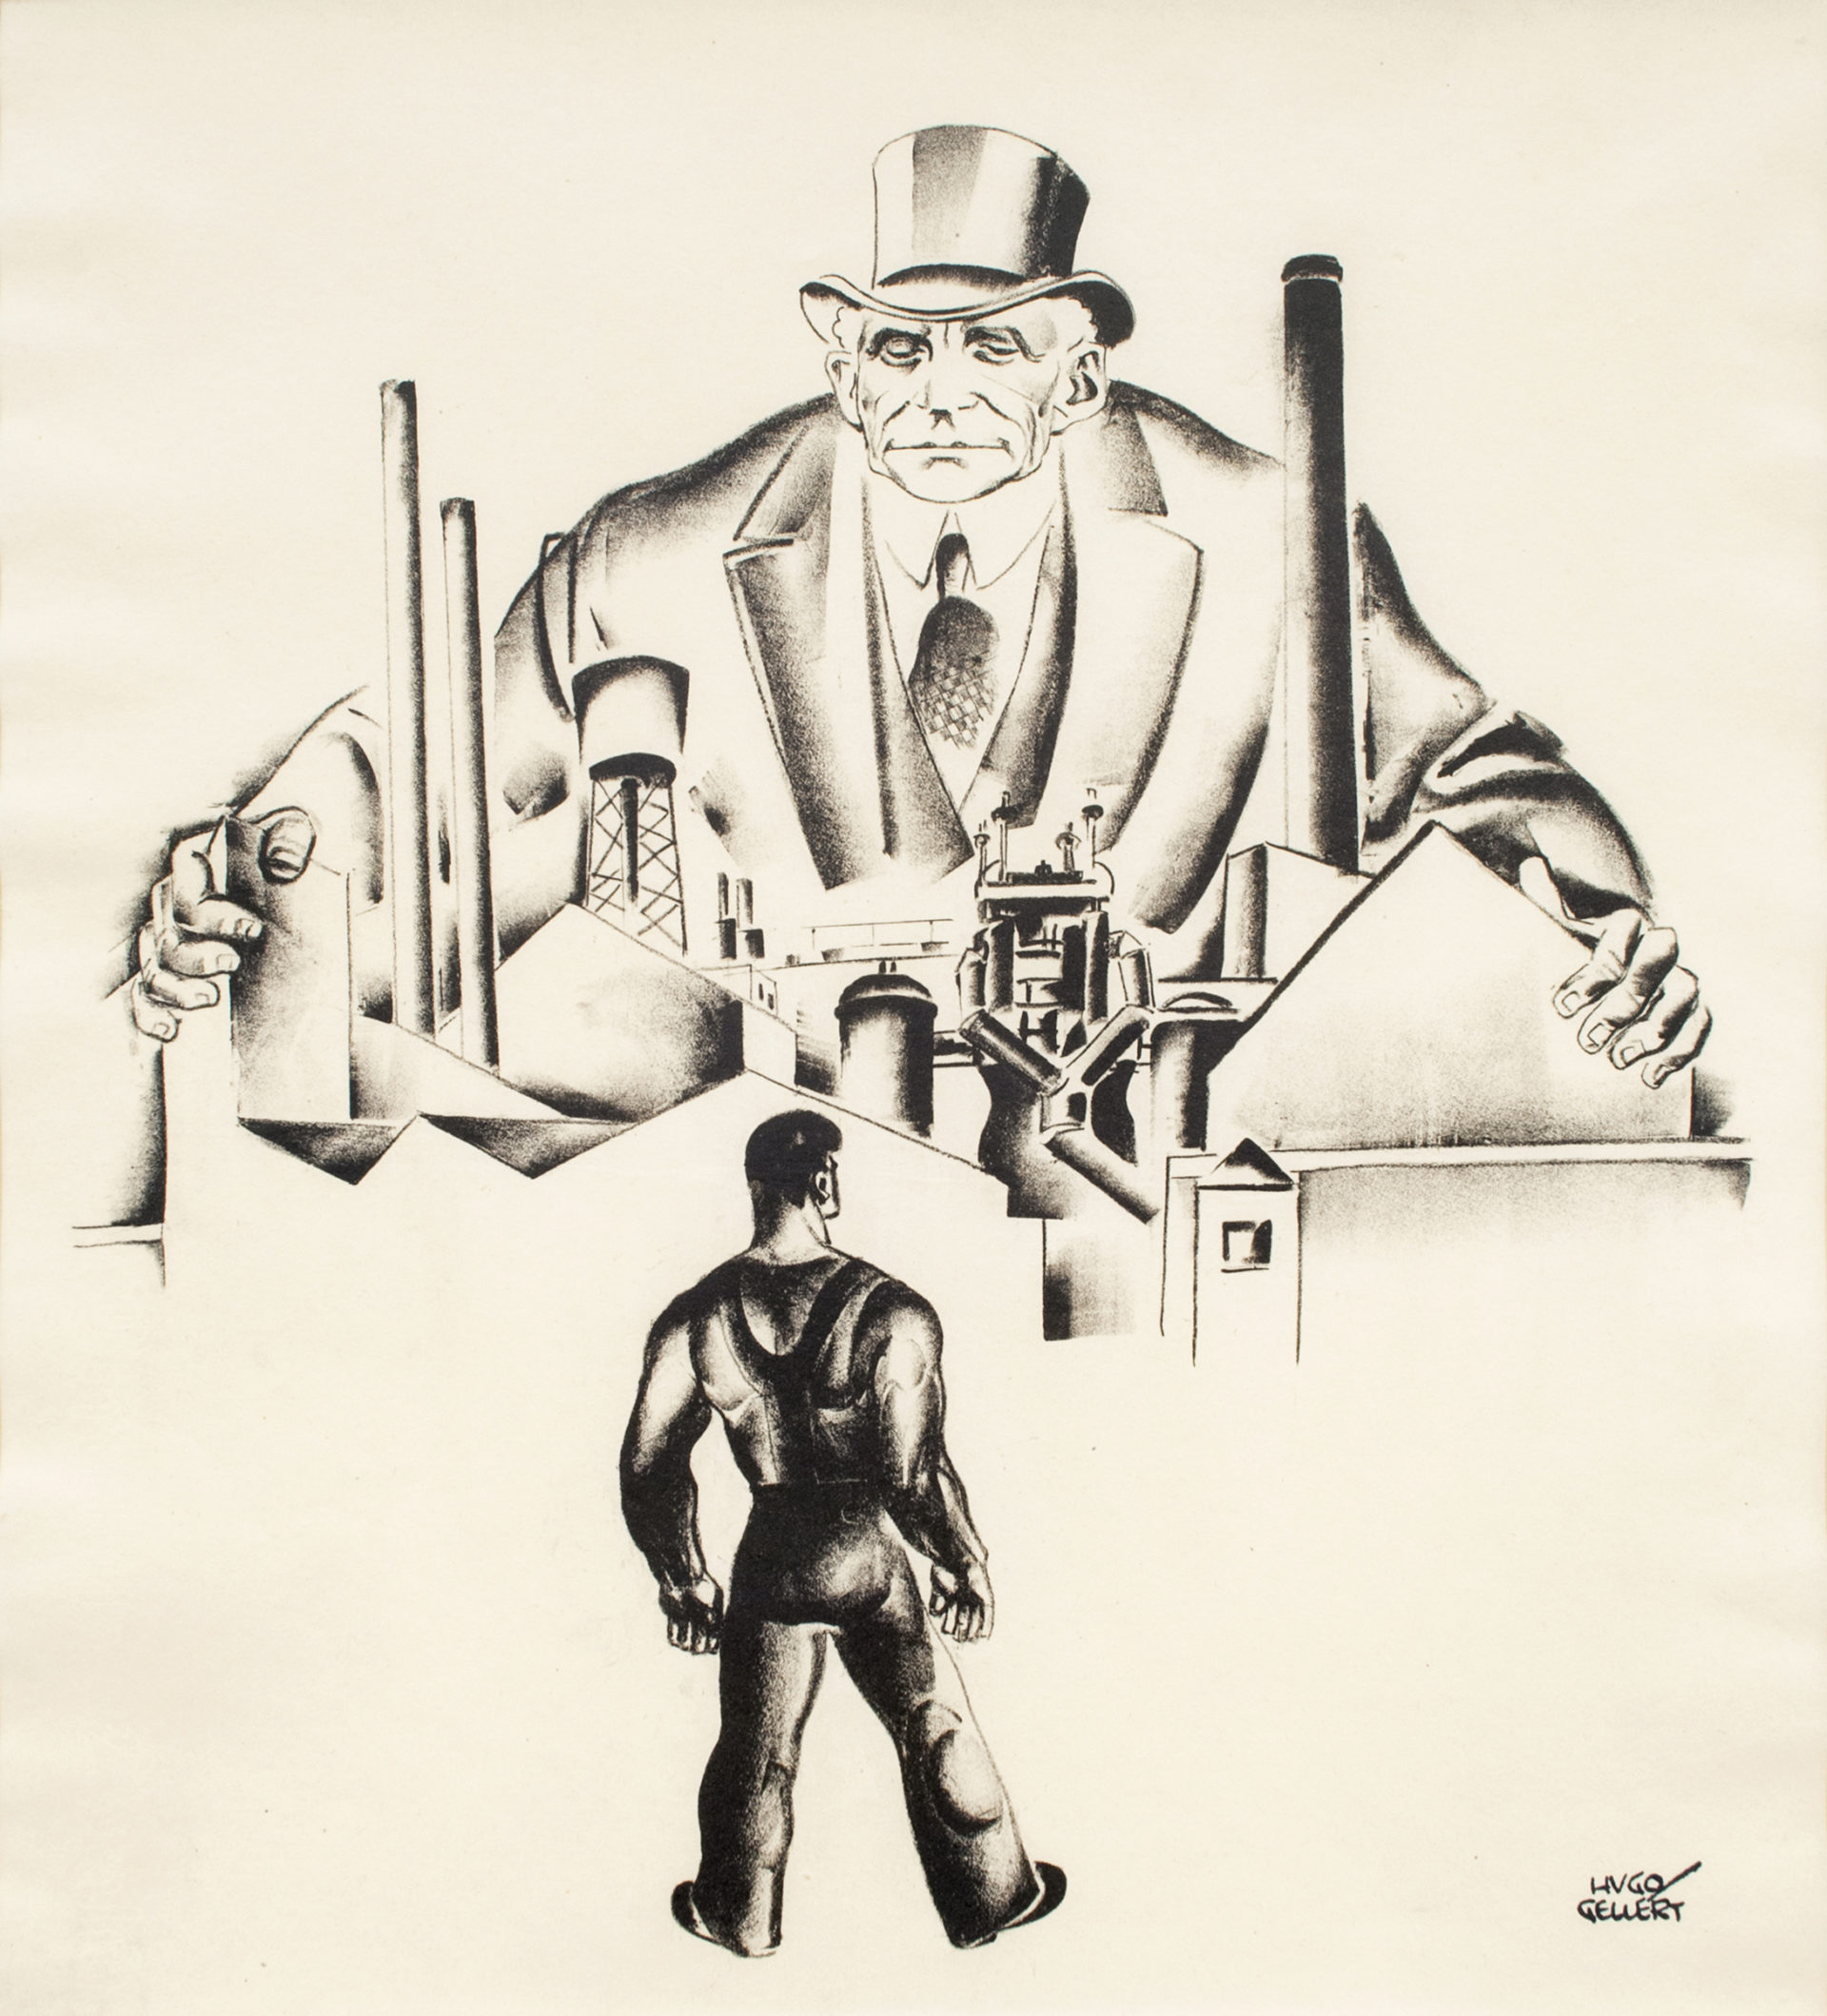 Primary Accumulation- Secret of primary accumulation, 1933, Lithograph 13 5/8 x 12 5/8 inches (34.6 x 32.1 cm) Edition of 133